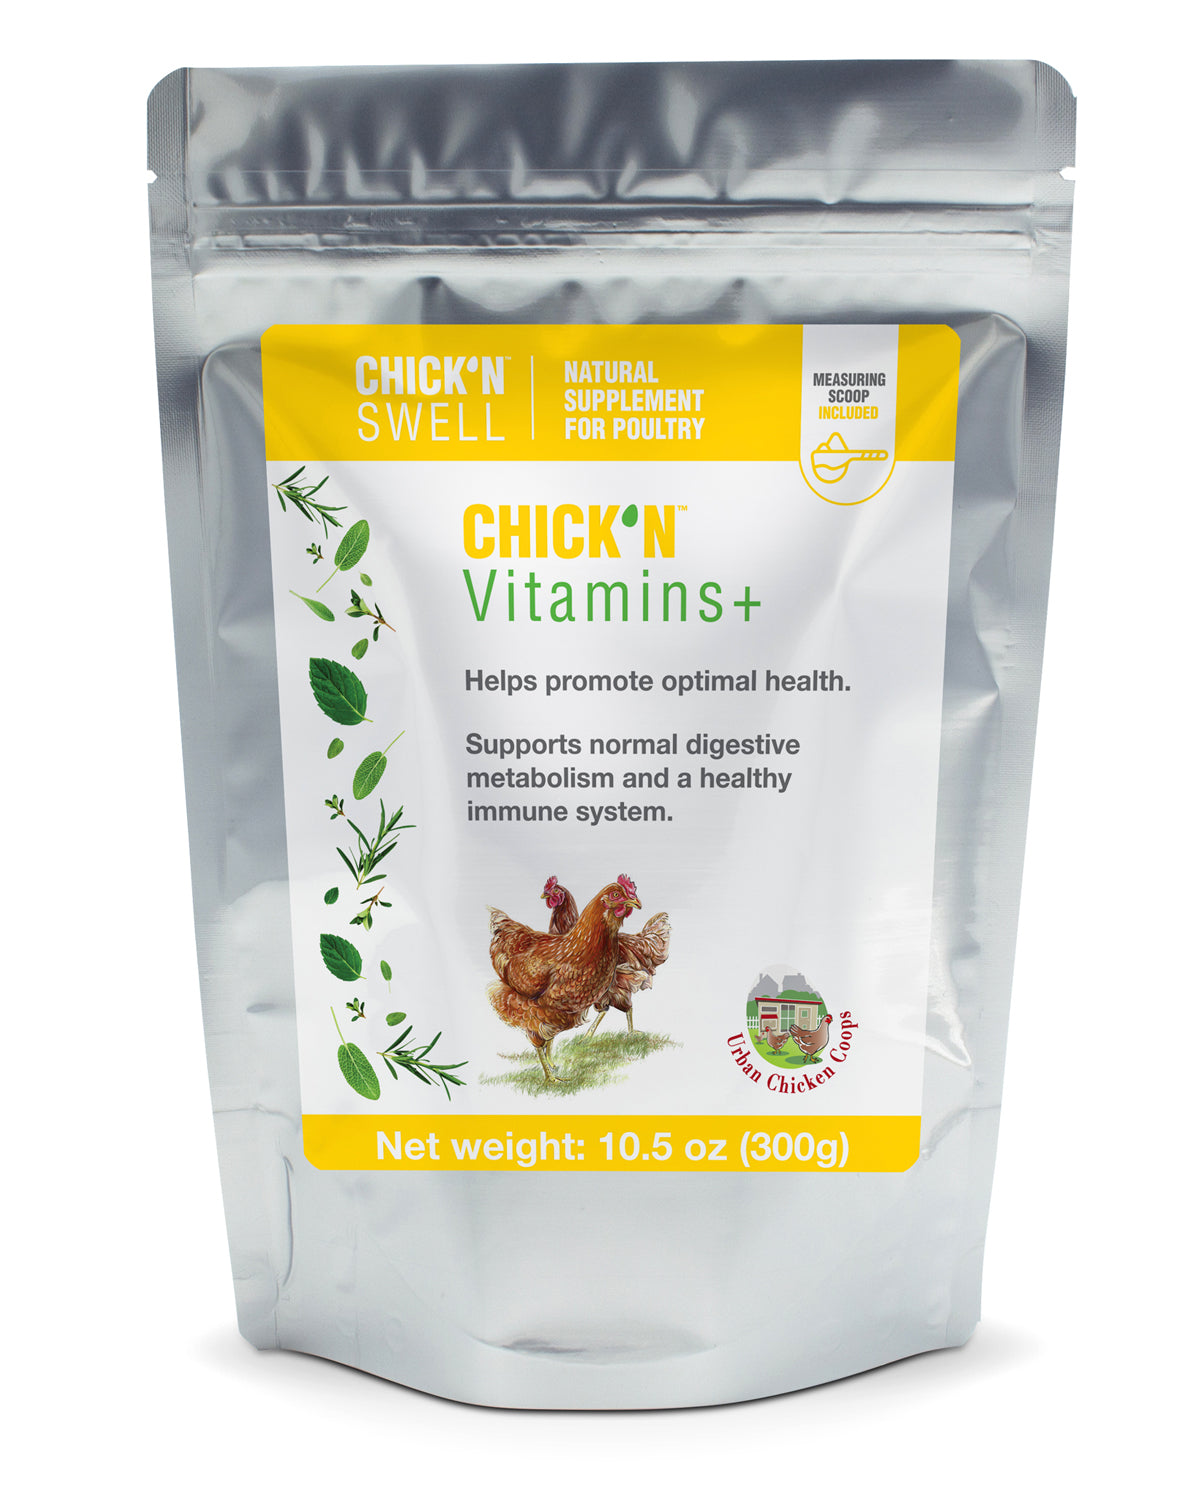 Chick’N ™ Vitamins+ Available on Amazon.com only